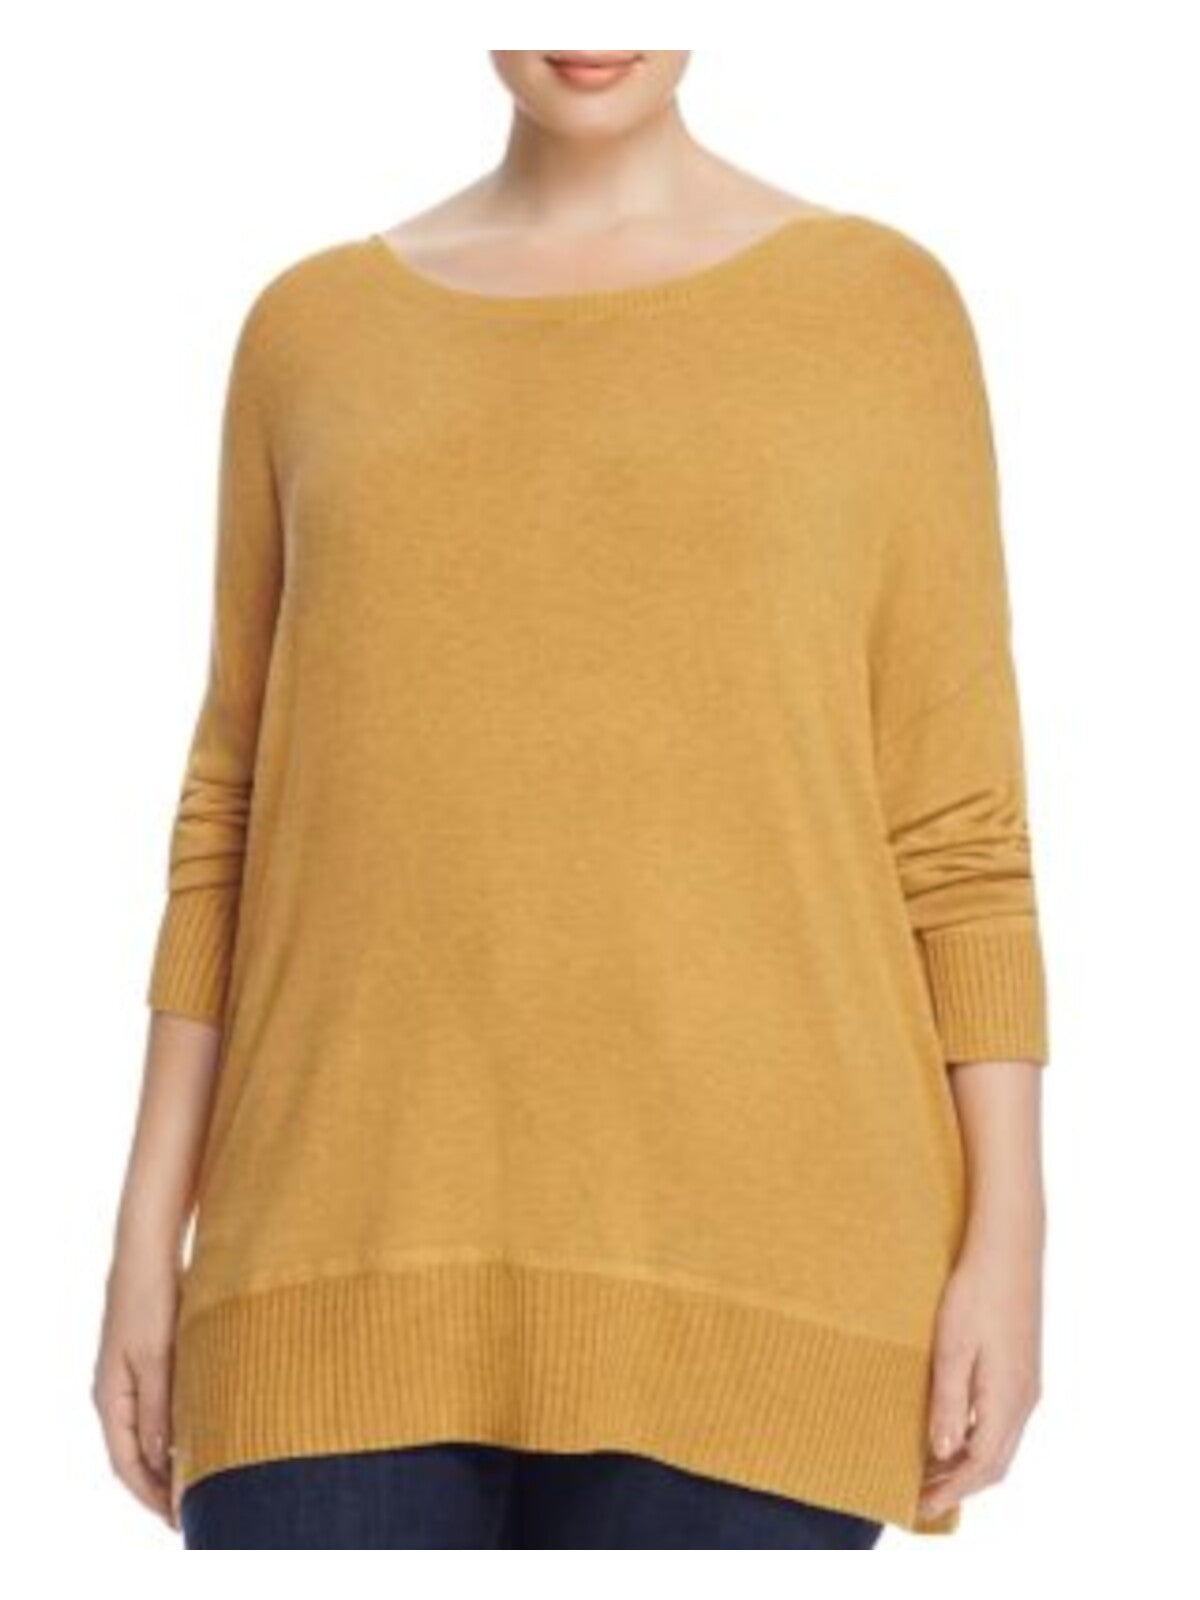 EILEEN FISHER Womens Yellow Stretch Ribbed Drop Shoulder Long Sleeve Jewel Neck Tunic Sweater Plus 2X